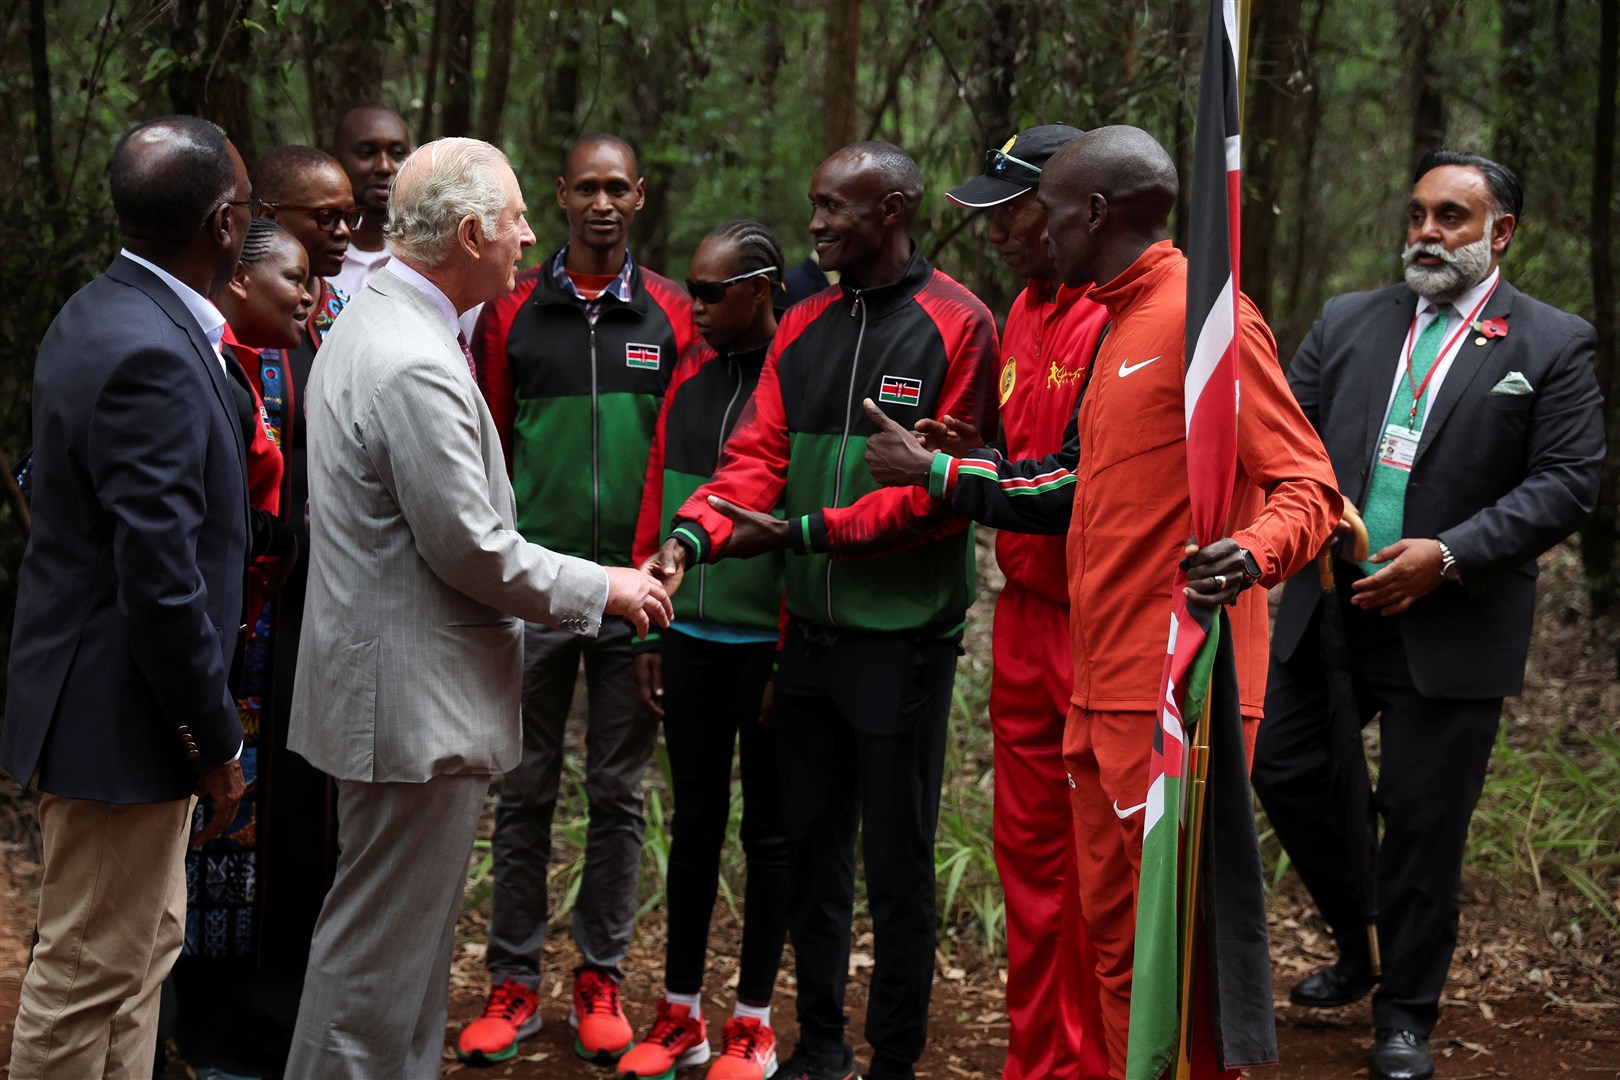 Charles and Kenyan marathon runner Eliud Kipchoge launched the 15km Run For Nature through Nairobi’s Karura Forest (Phil Noble/PA)